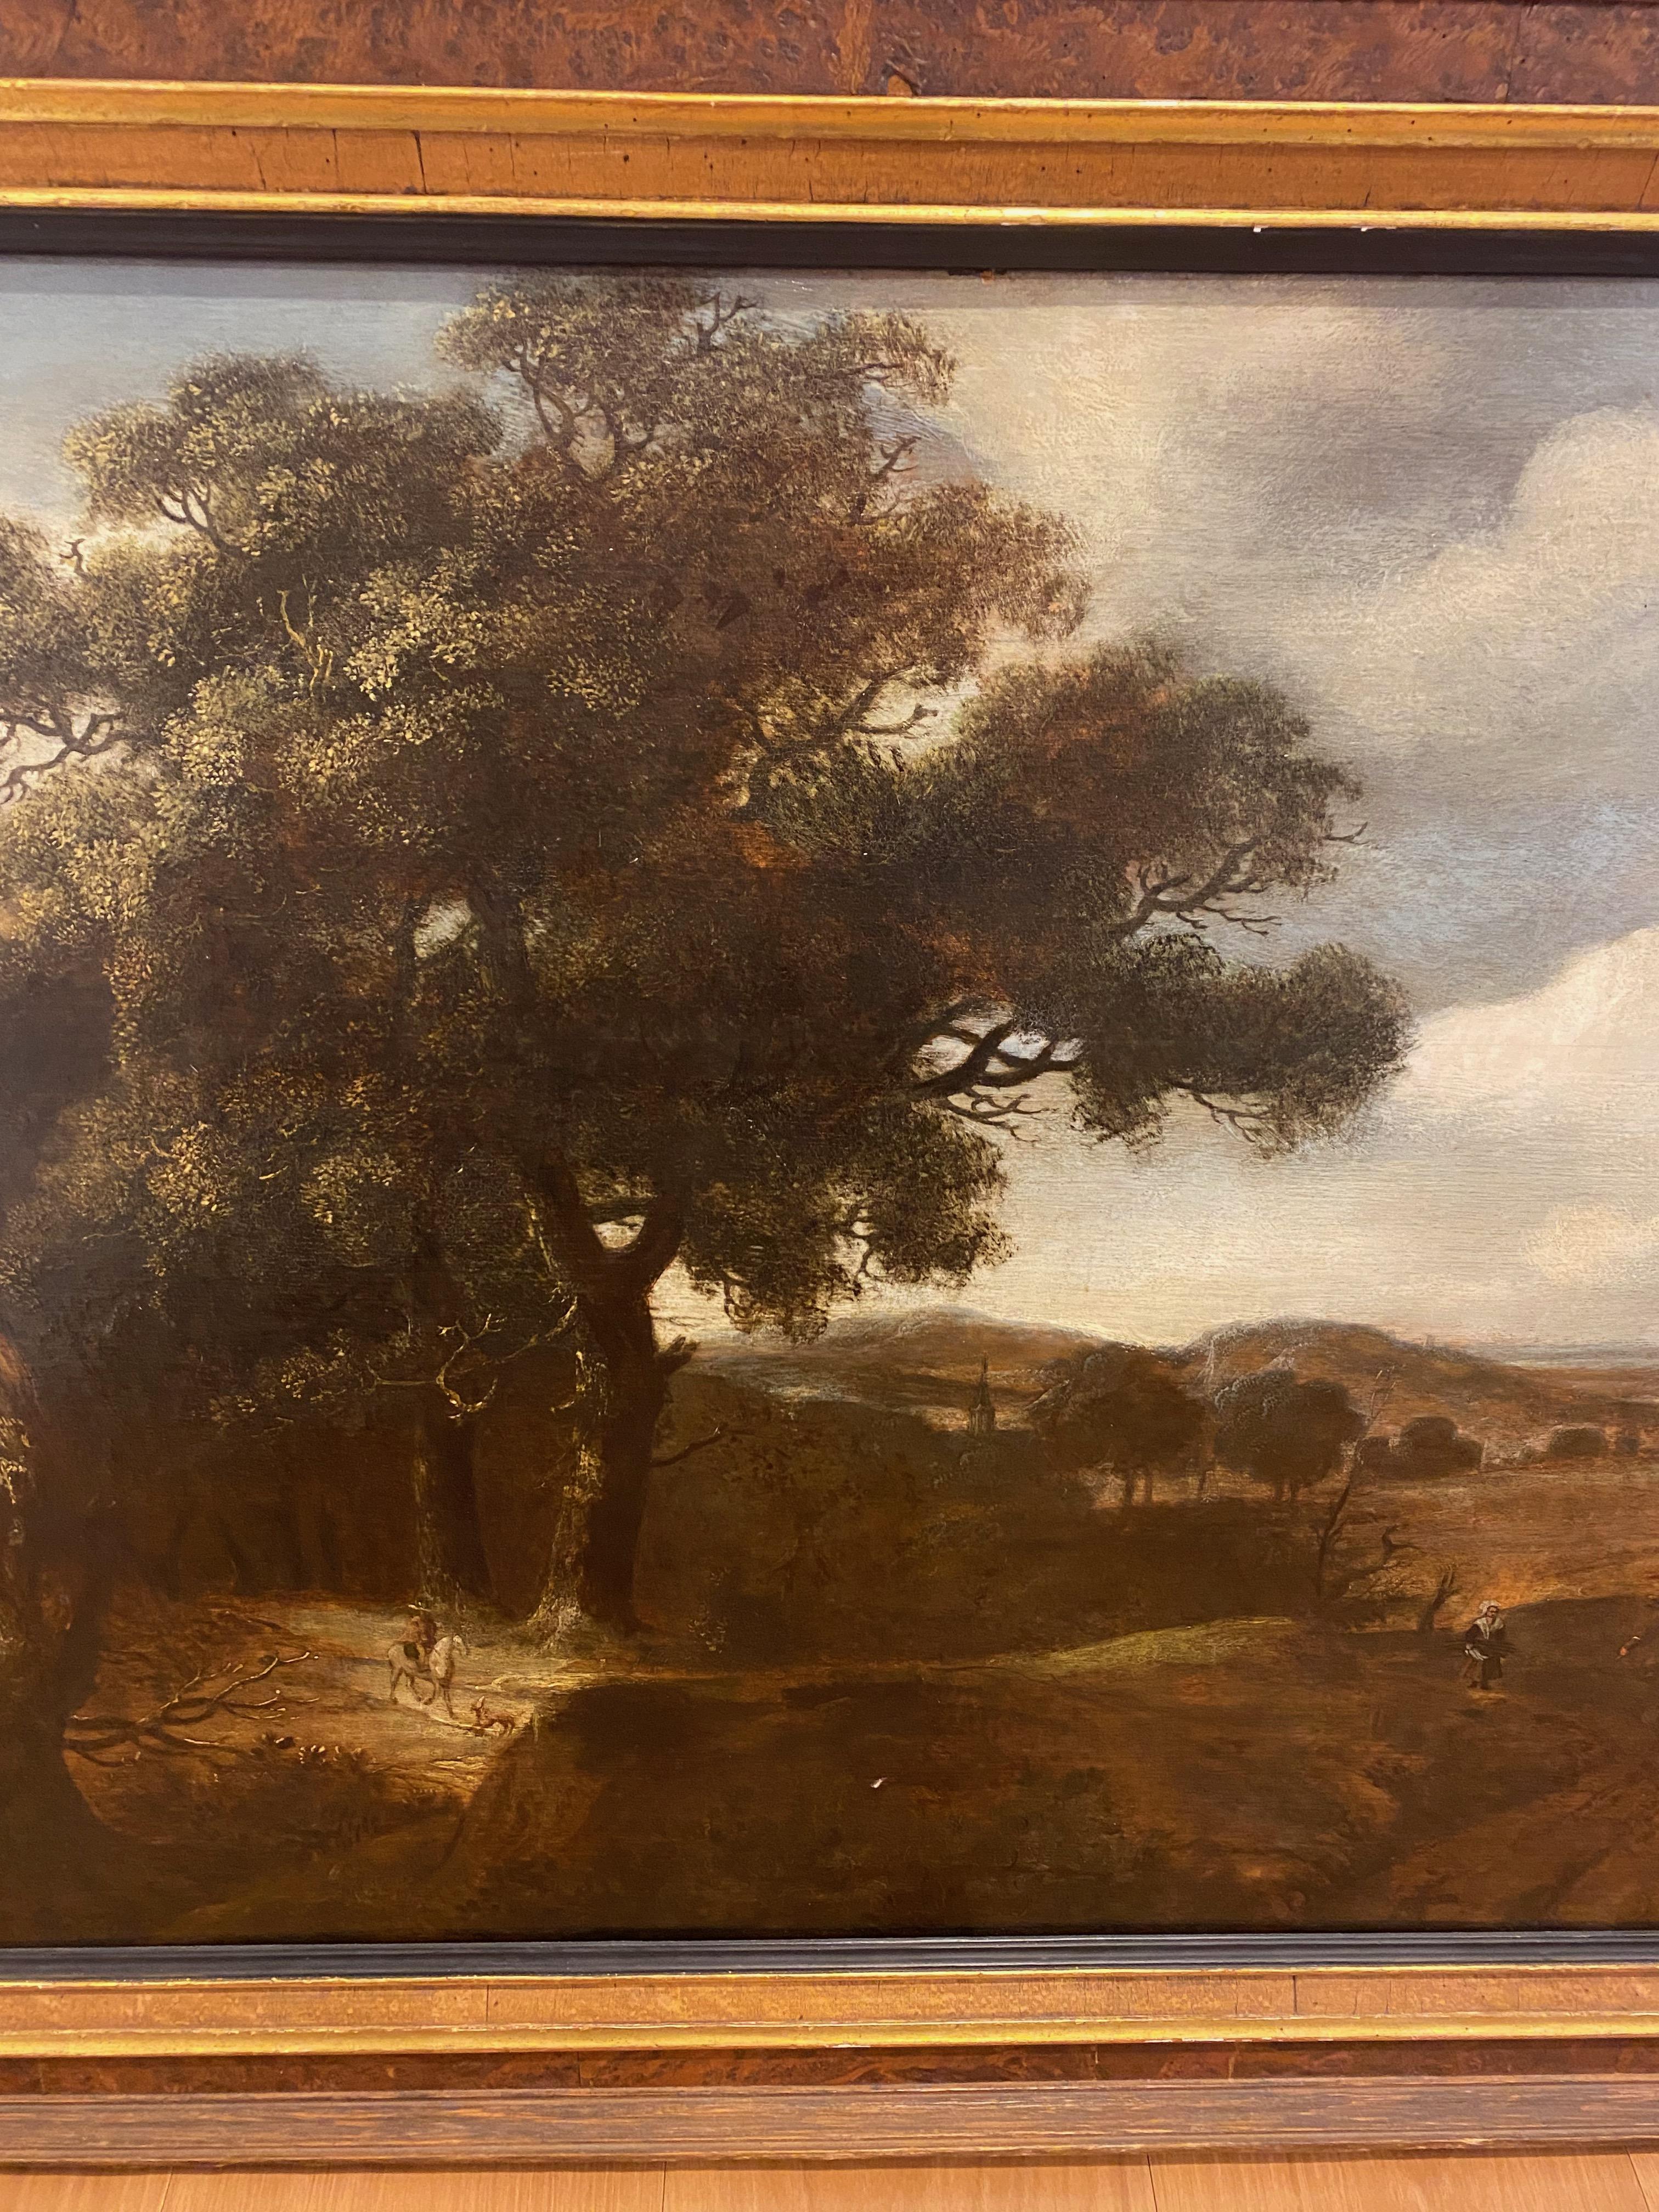 Dutch Landscape, Follower of Jacob van Ruisdael, Indistinctly Signed, Ca. 1720

This large oil on board landscape is painted by a Follower of Jacob van Ruisdael and indistinctly signed. It depicts the sweeping distant vistas over the Dutch